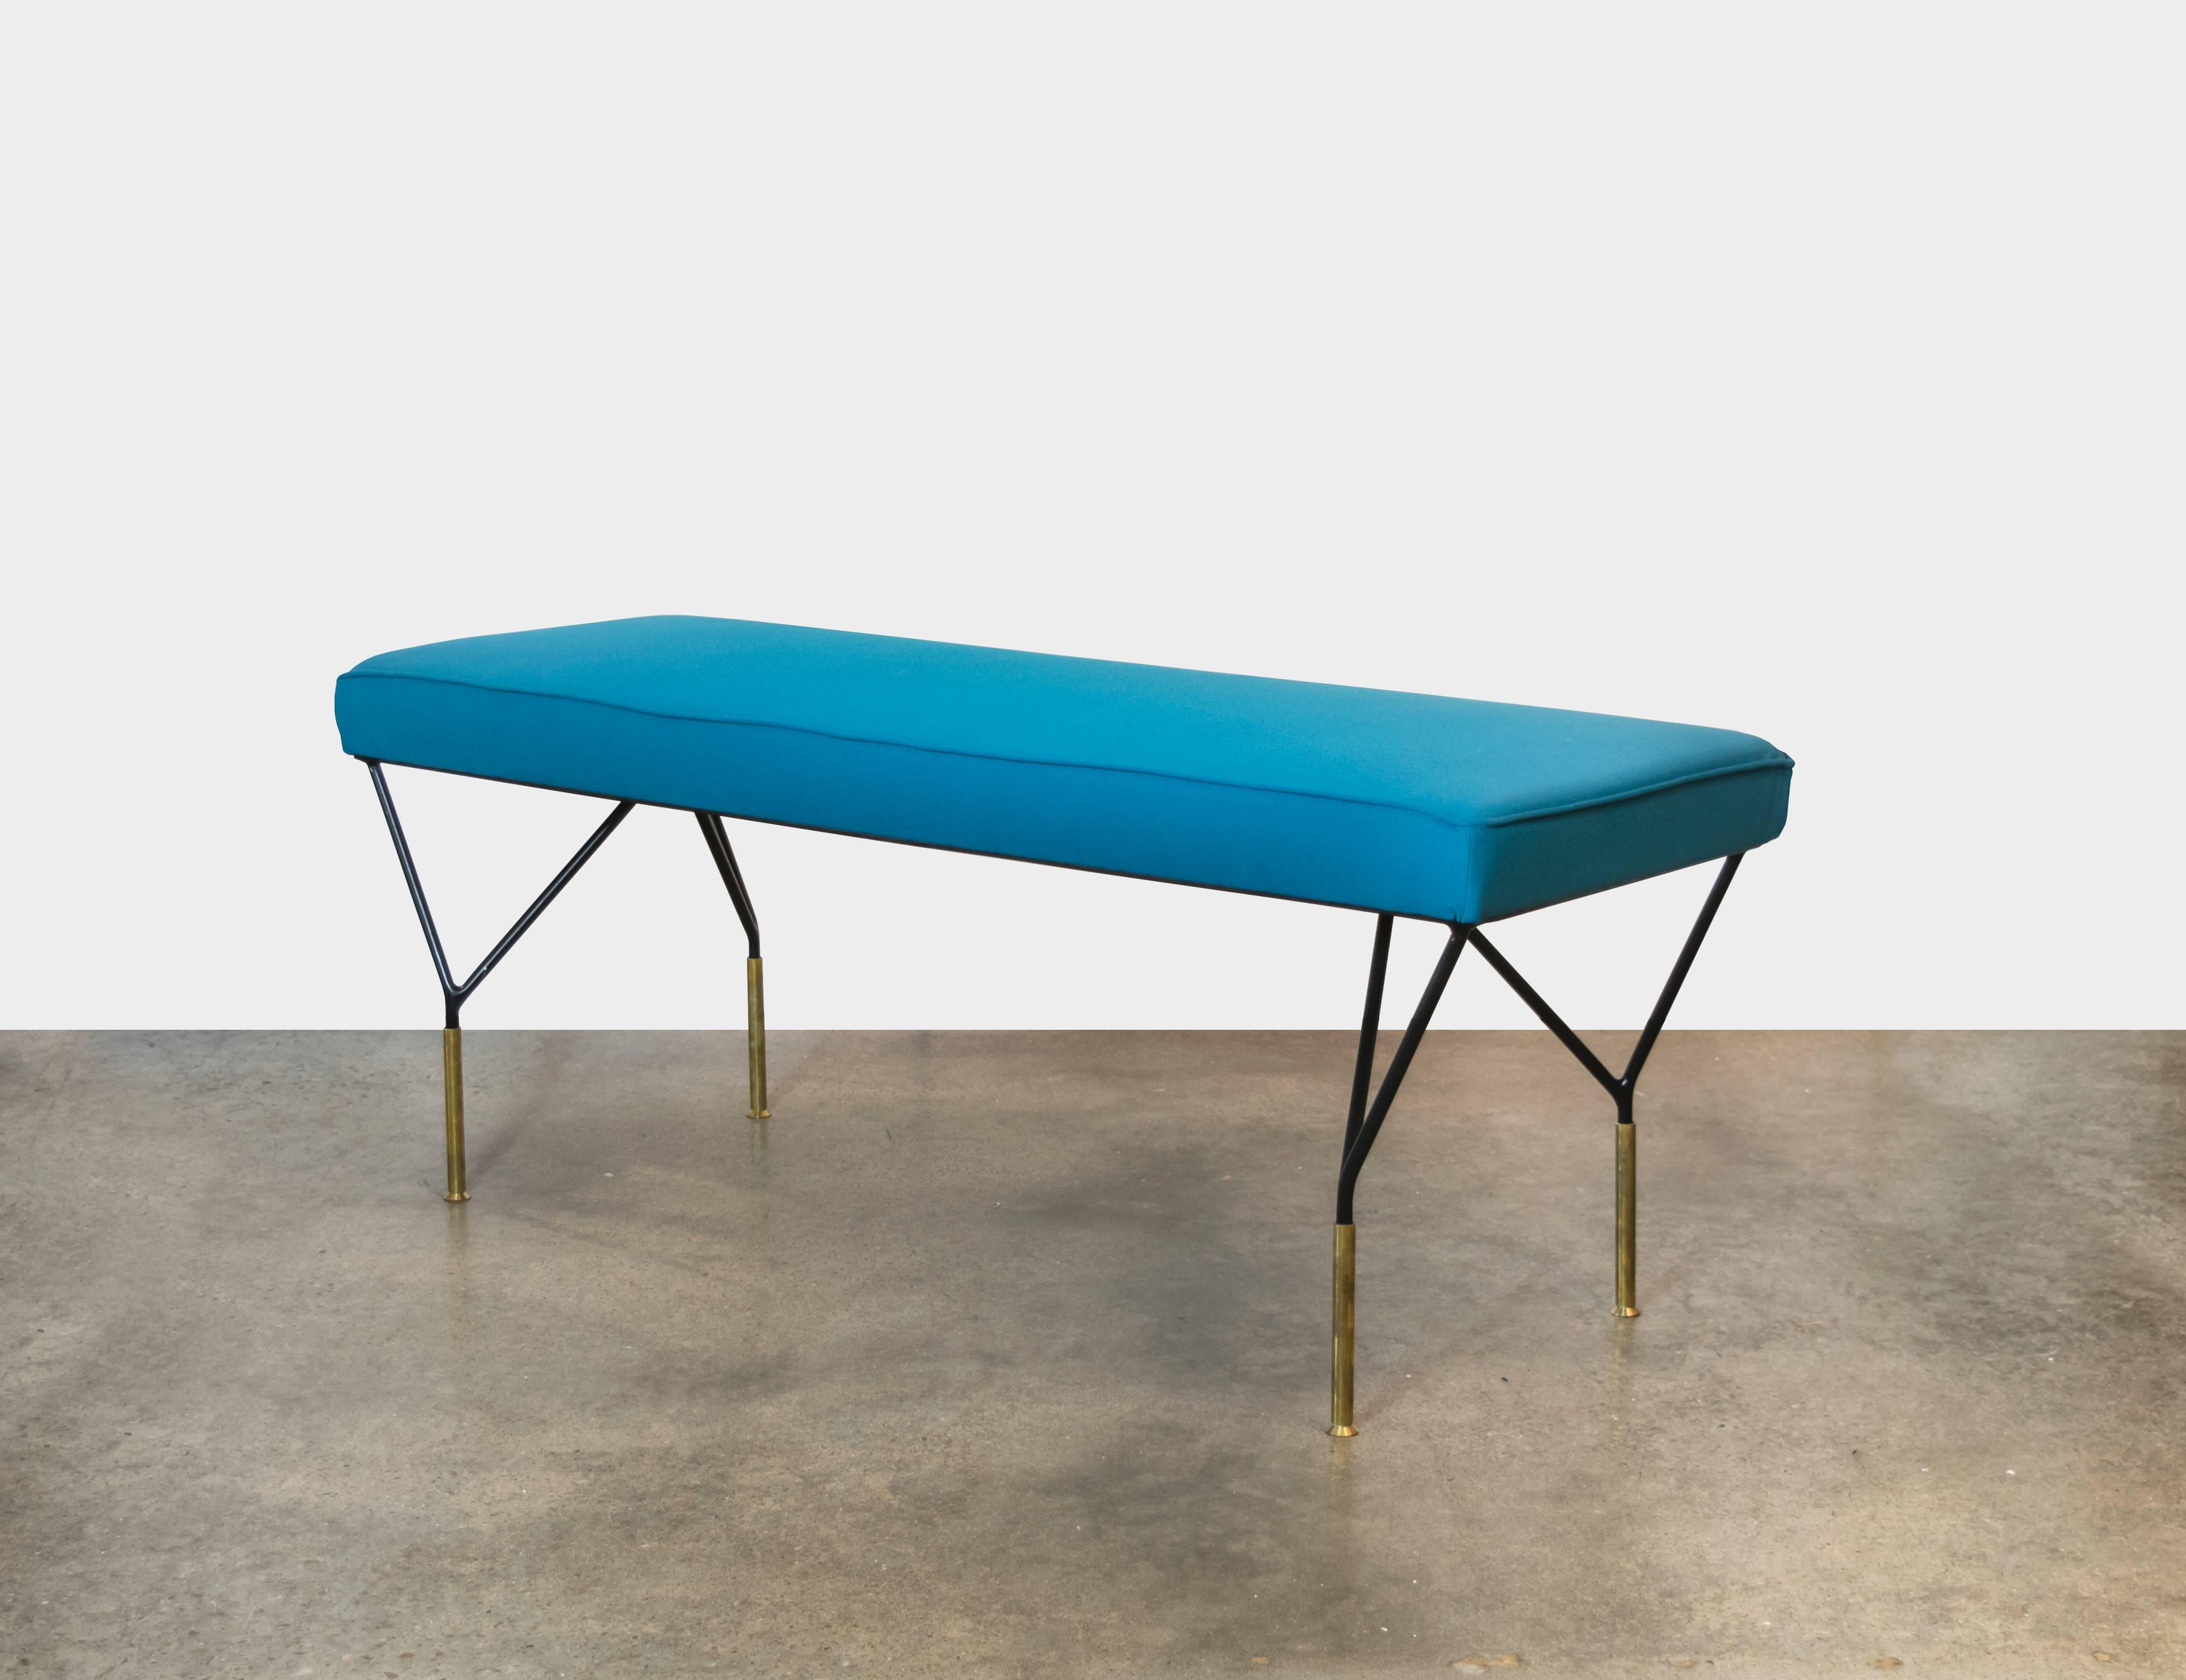 An absolutely exquisite 1950s Italian Mid-Century bench with four Y-shaped legs and a middle support bar. Fabric is not original - can be used as is or recover to your liking.